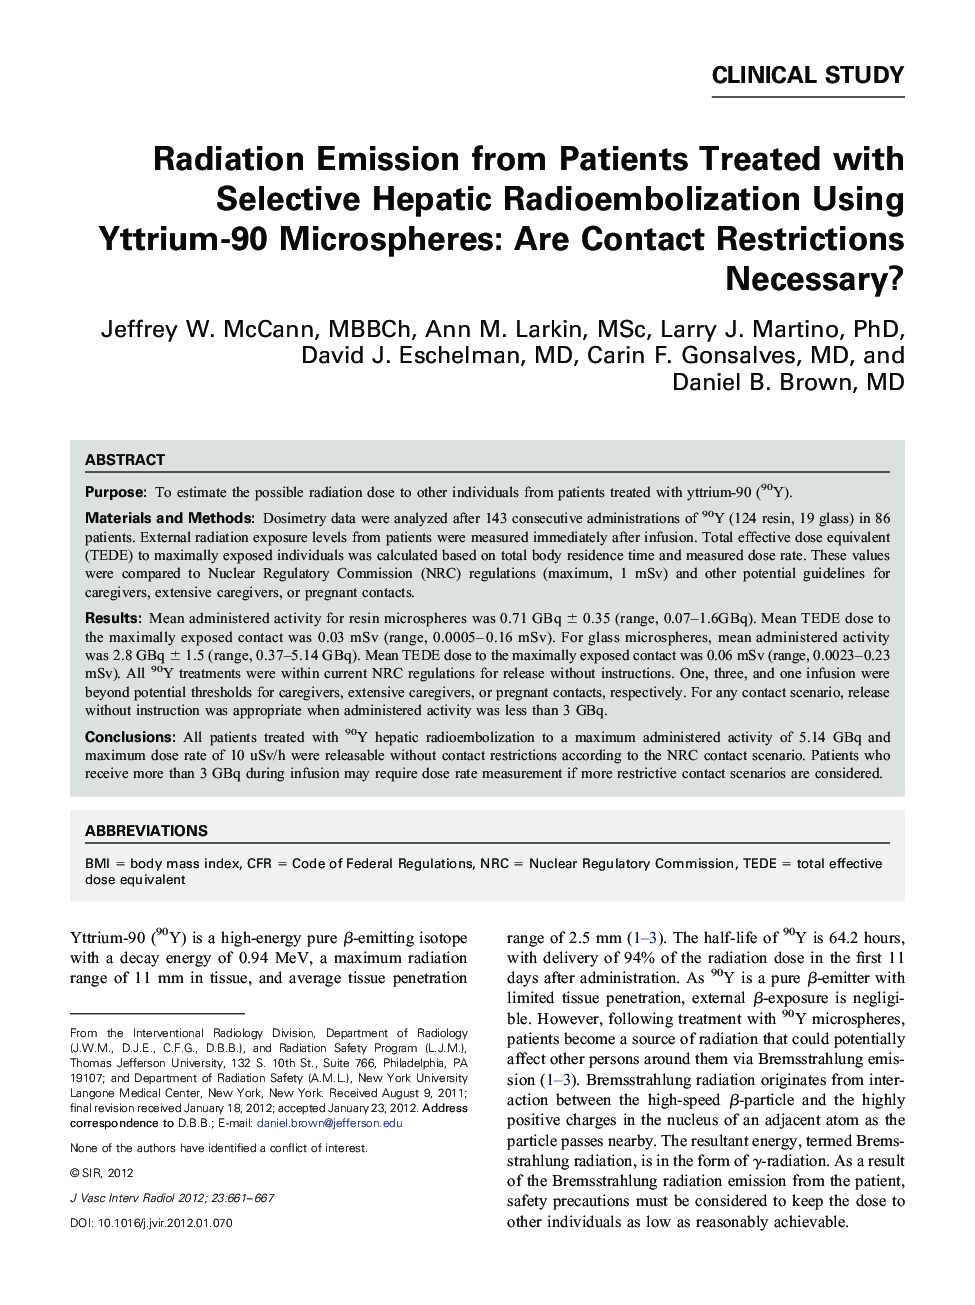 Radiation Emission from Patients Treated with Selective Hepatic Radioembolization Using Yttrium-90 Microspheres: Are Contact Restrictions Necessary?